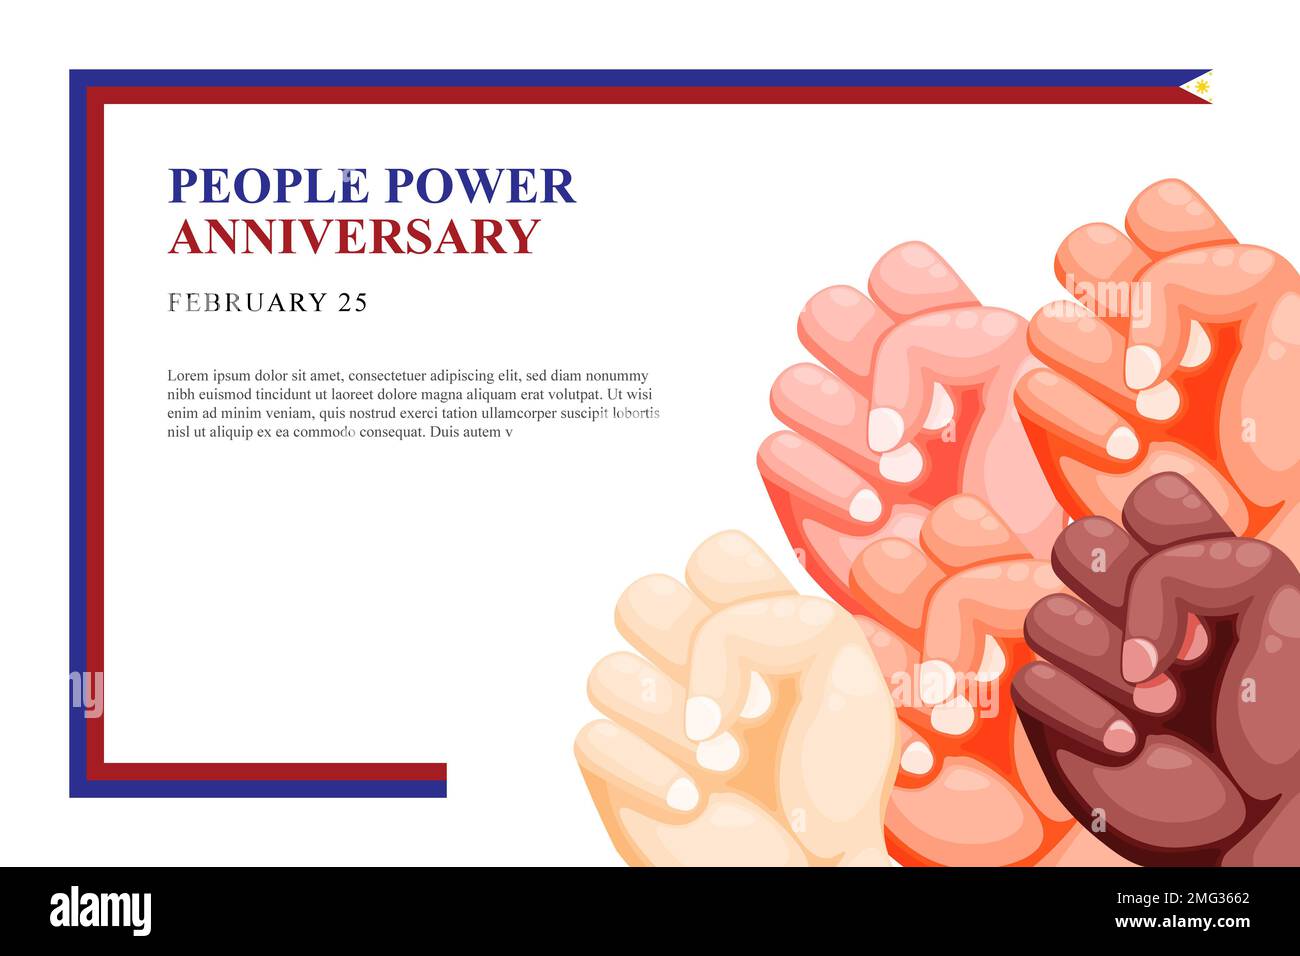 People Power Anniversary background. Vector illustration background. Stock Photo